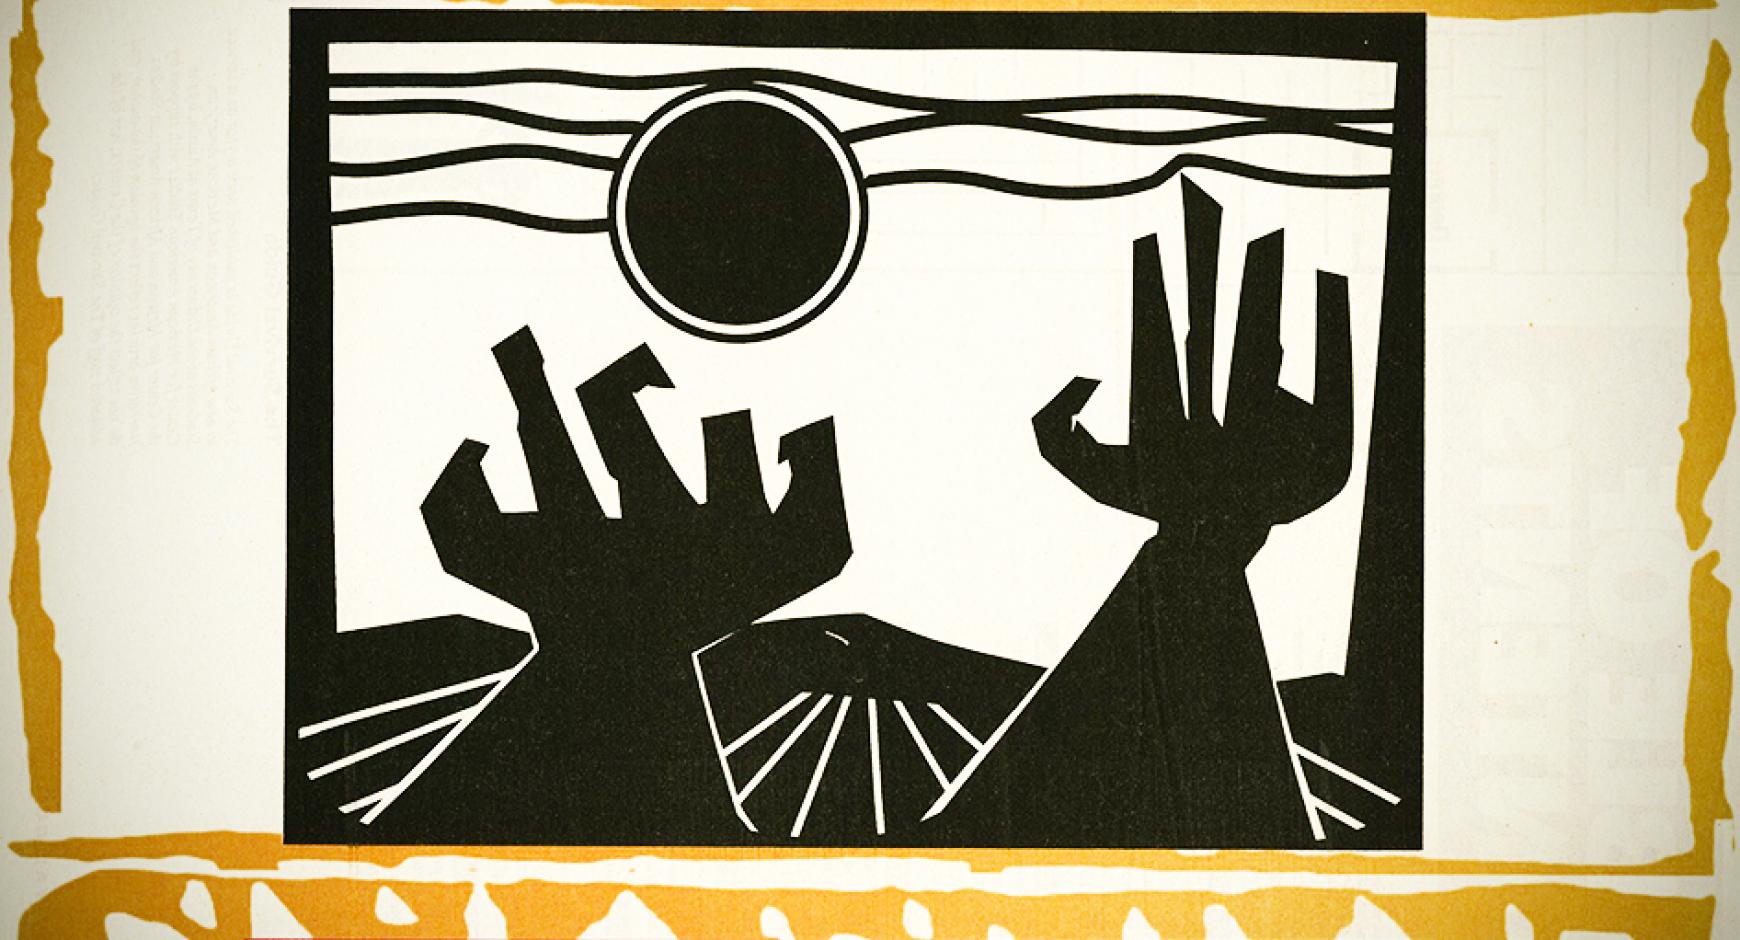 The image is a graphic from the CMAS at 50 celebration. It is a drawing depicting hands reaching to the sun with hills or landscape in the background.  The sun, hands, and landscape are black on white background.  The entire image is centered on a beige and yellow border.